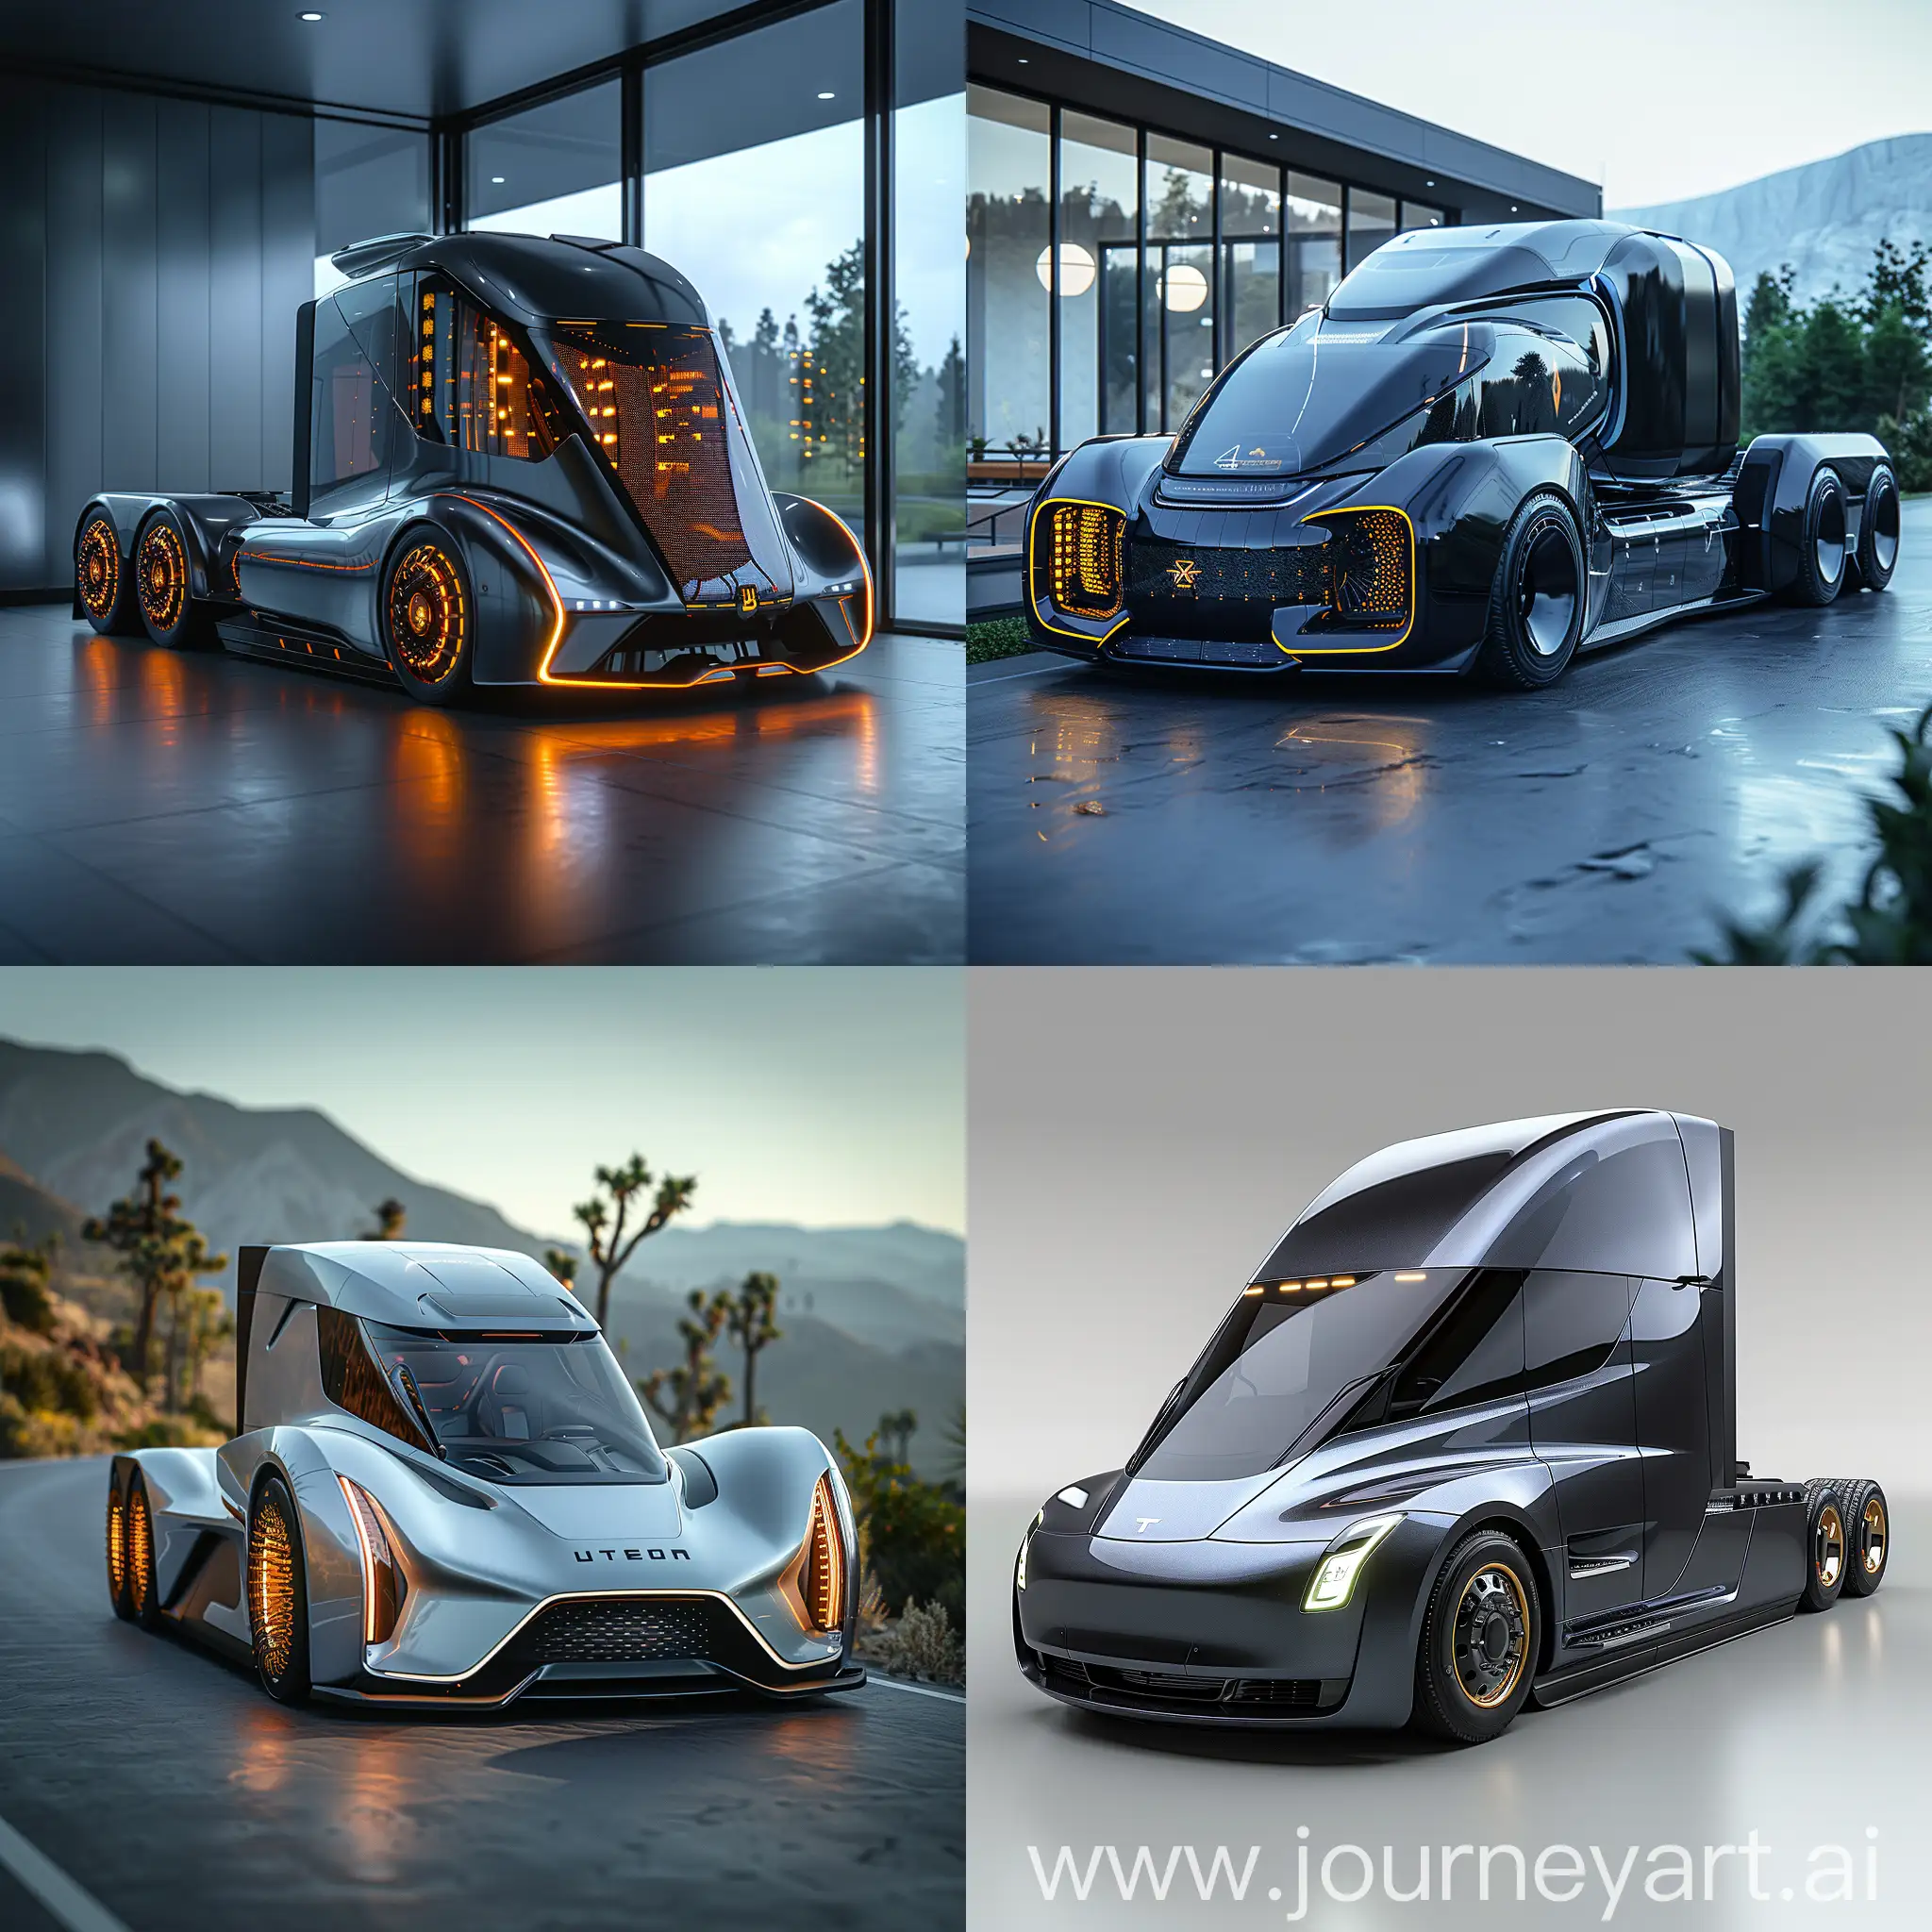 Futuristic-Electric-Truck-with-Solar-Panels-and-Autonomous-Driving